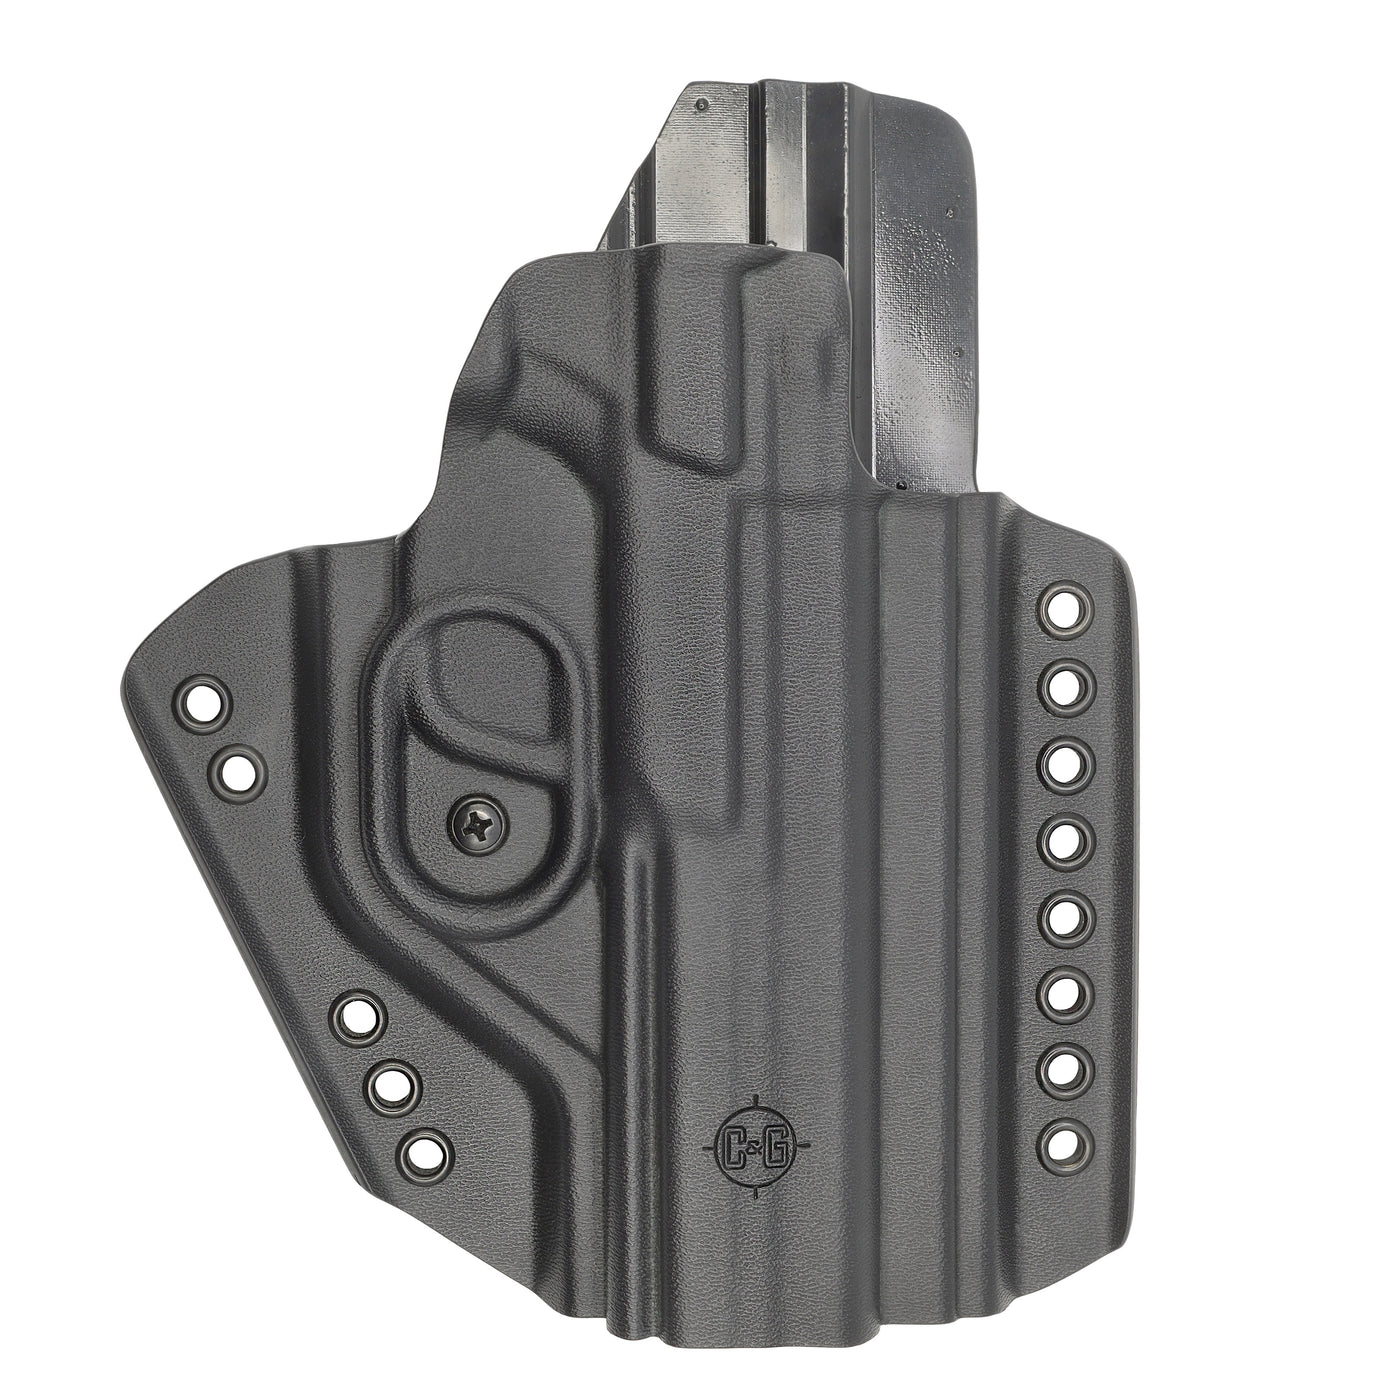 C&G Holsters quickship chest mounted system S&W M&P 9/40